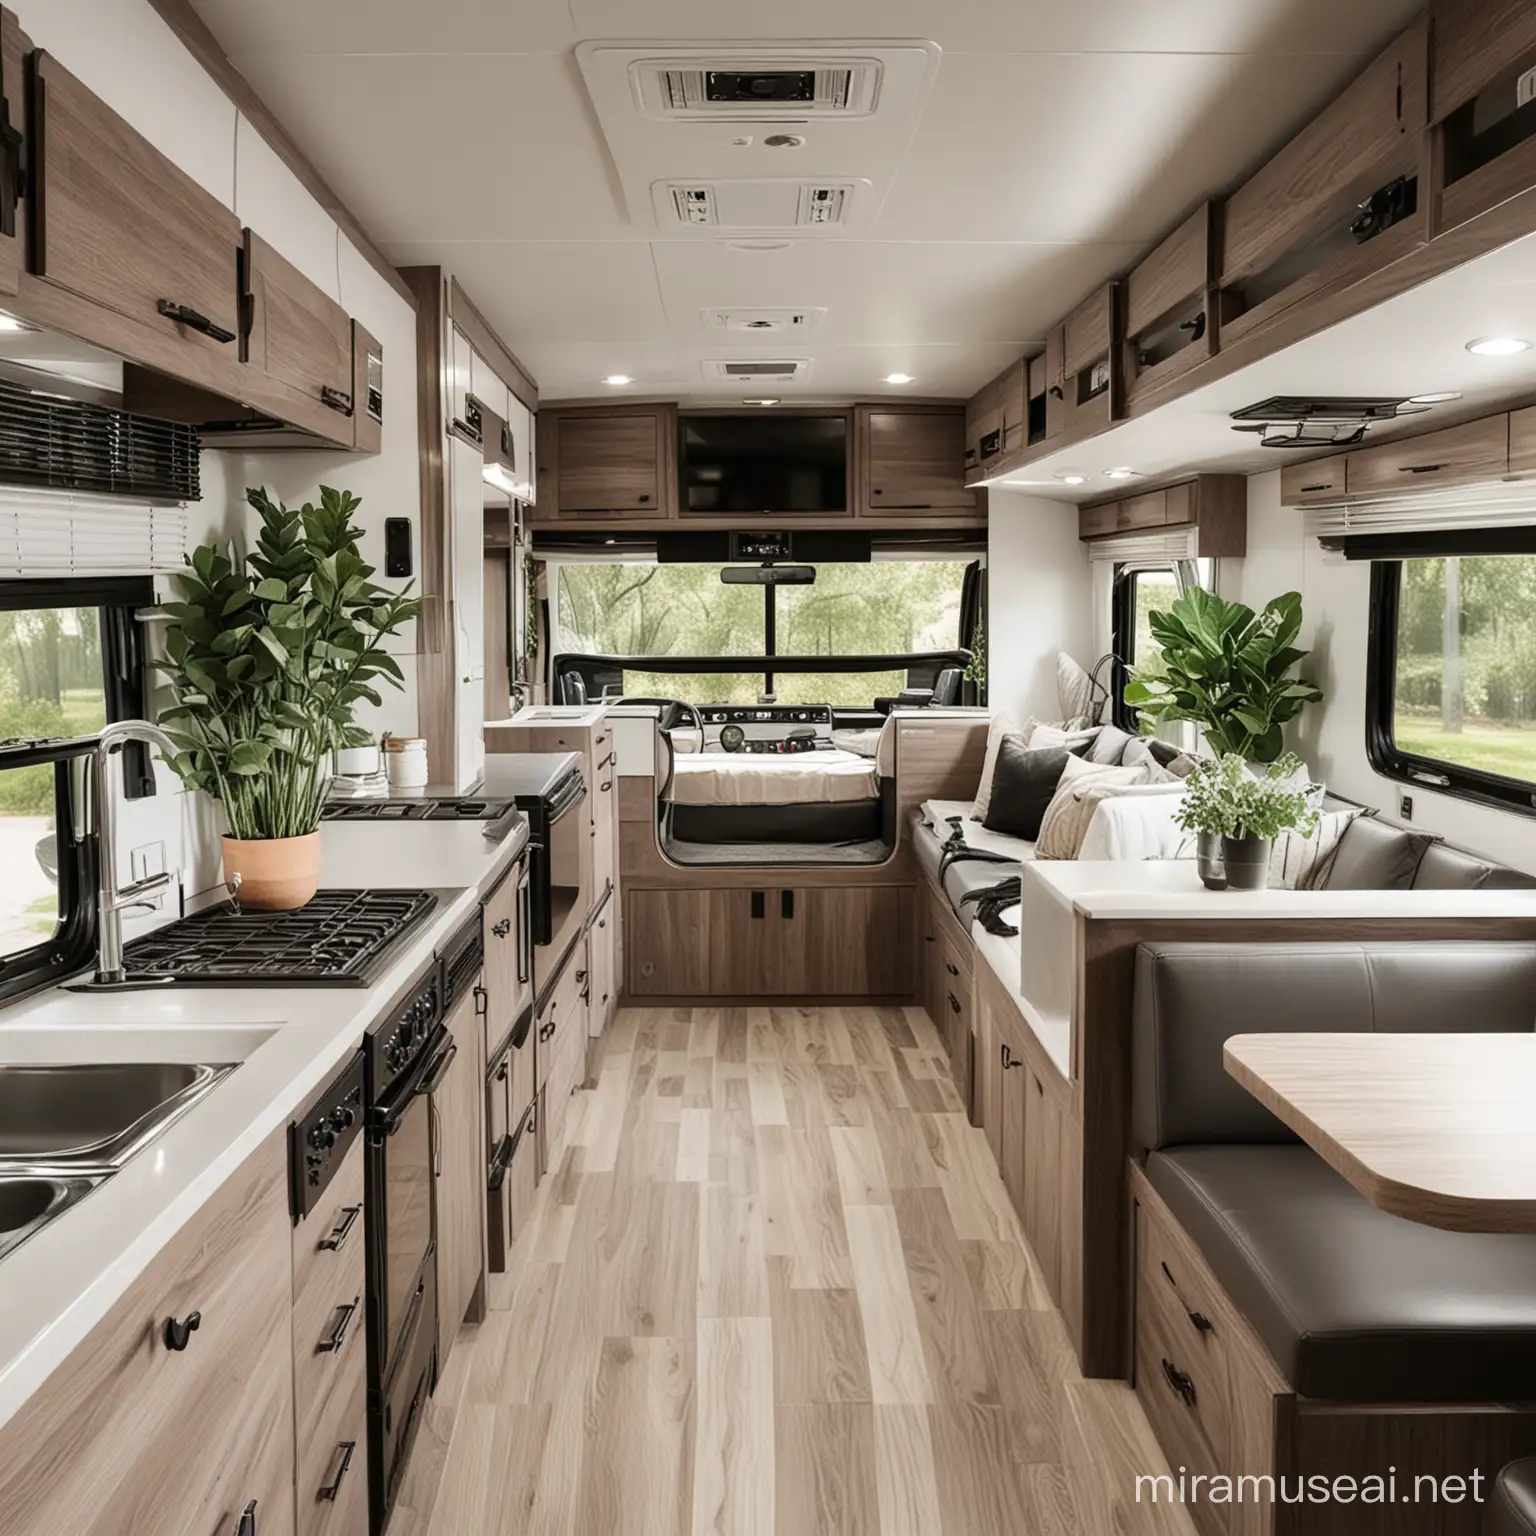 Modern RV Interior with Beautiful Cabinets and Foliage Accents